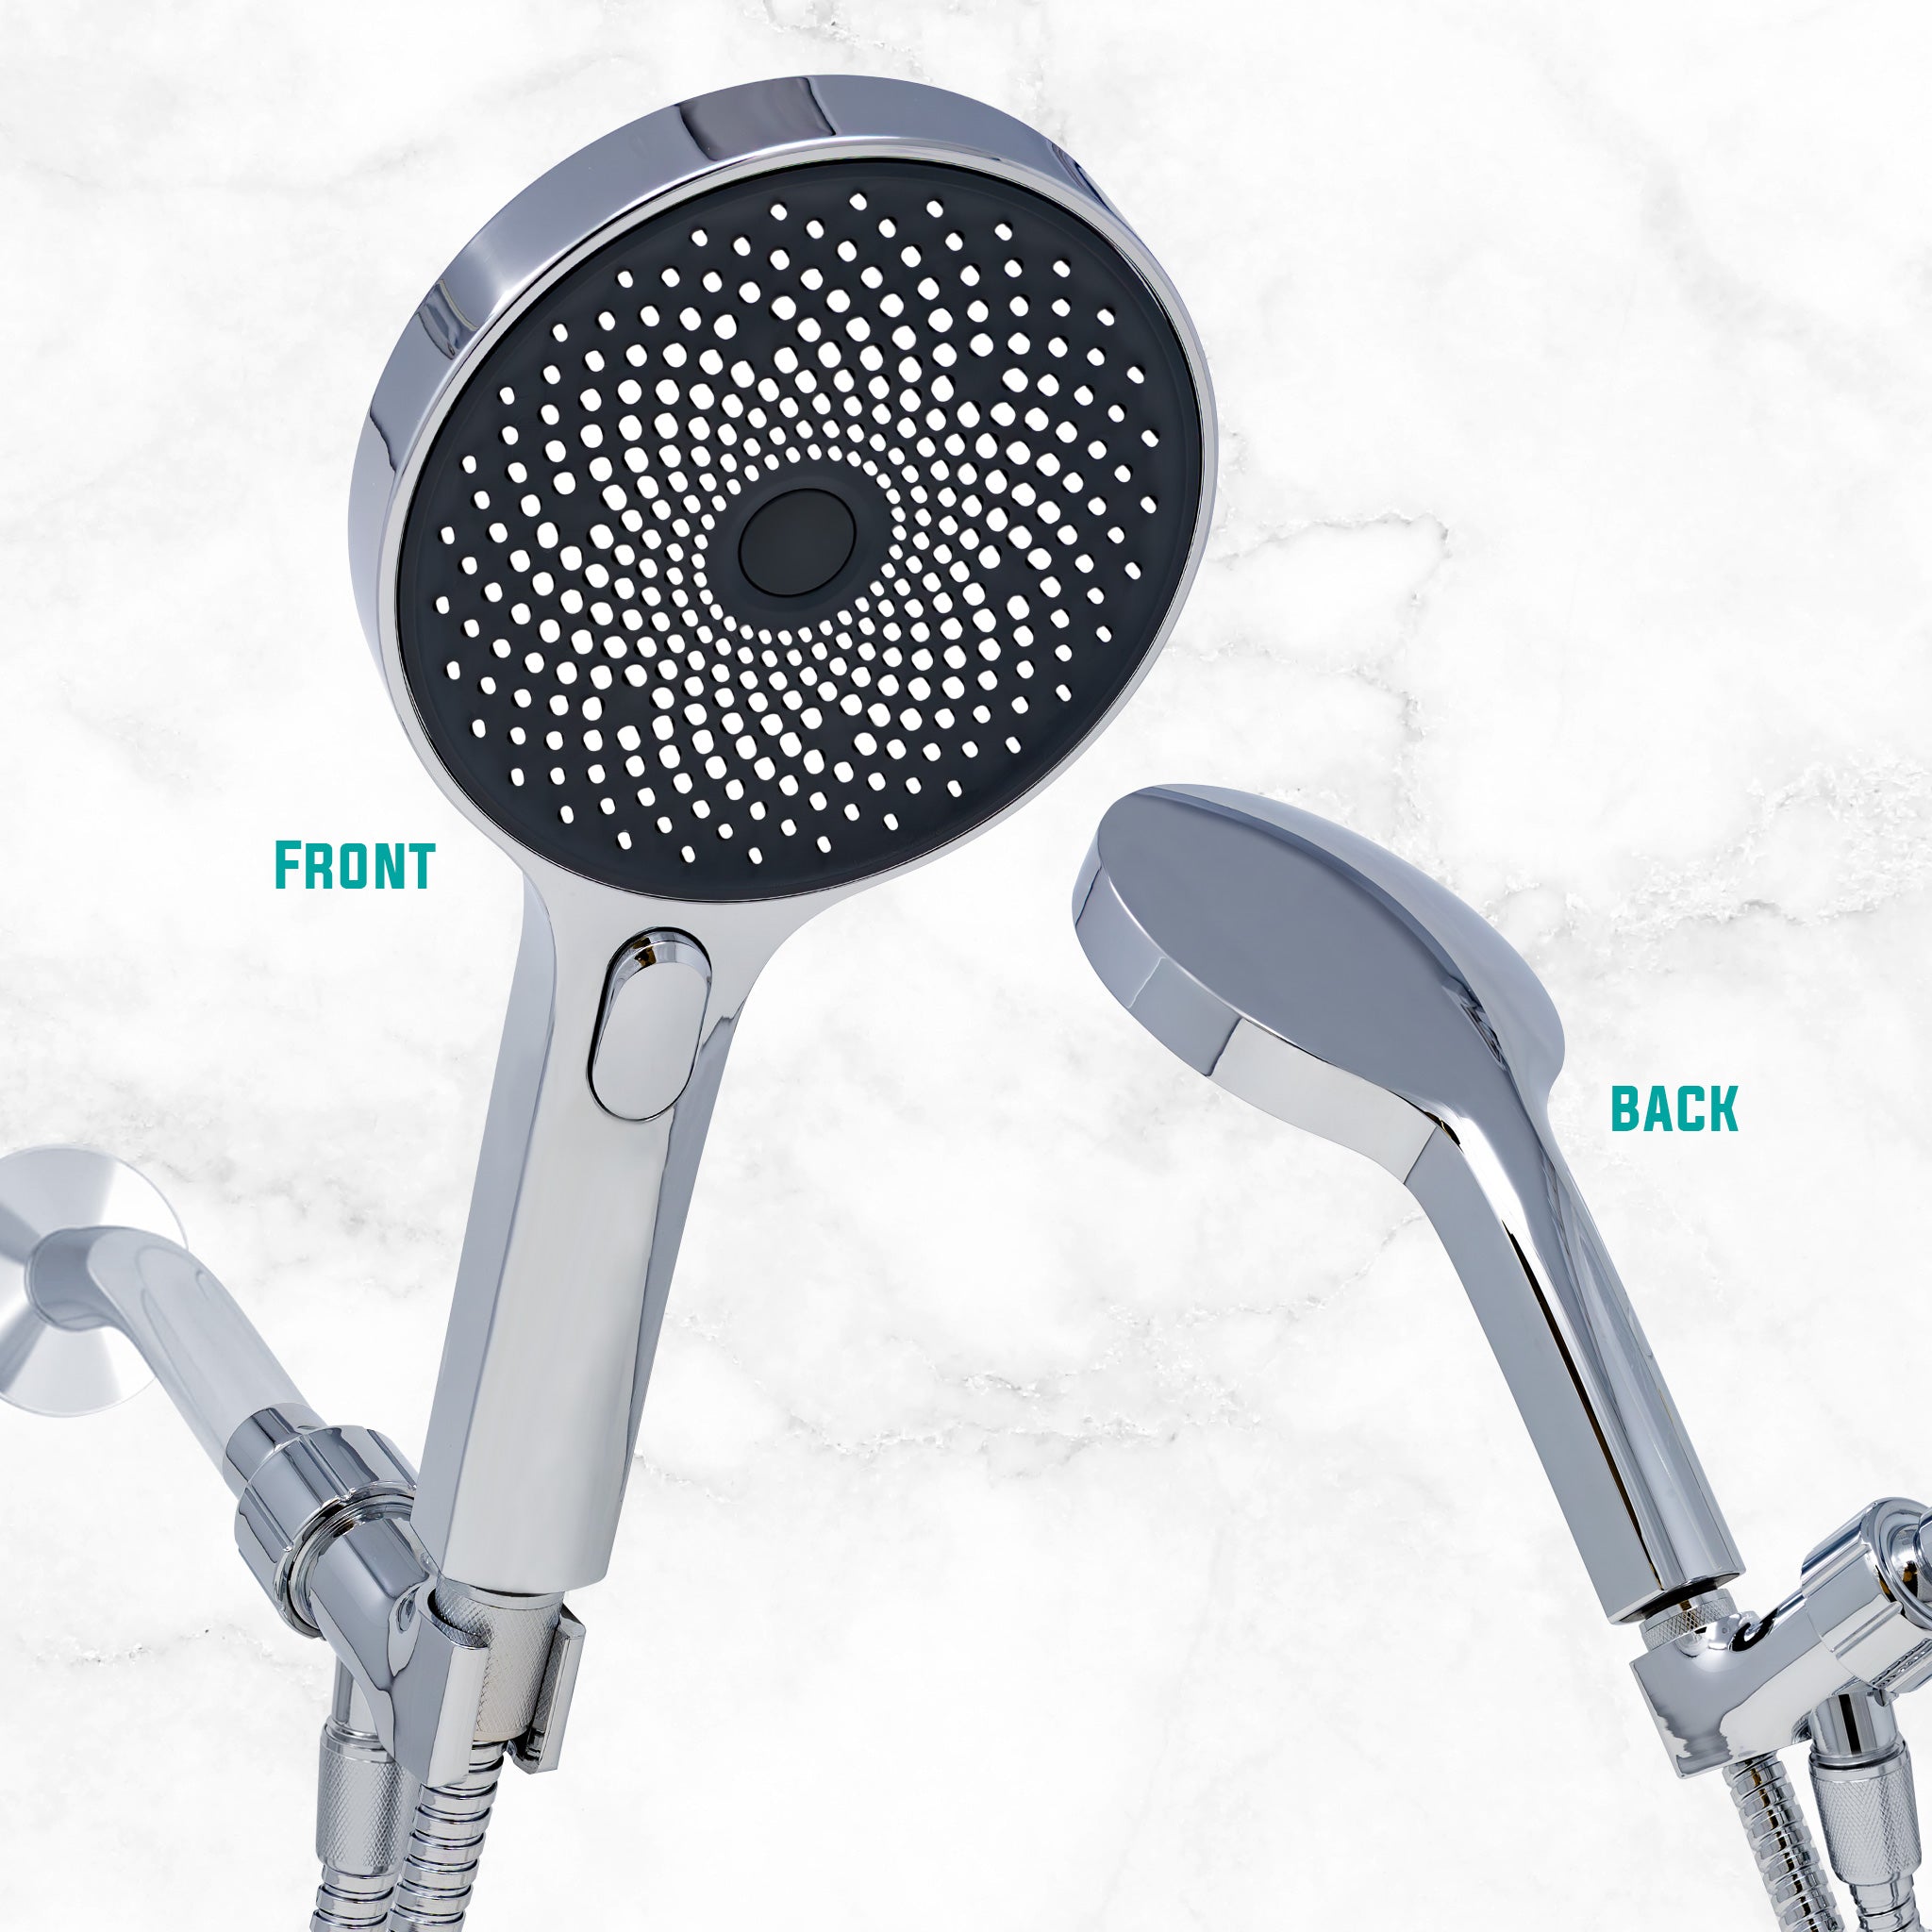 Metpure High-Pressure Handheld Shower Head with Easy Clicker - Multiple Spray Patterns. 5" Large Head for Waterfall Showering Experience. Stainless Steel Hose & Adjustable Mount Holder. Chrome